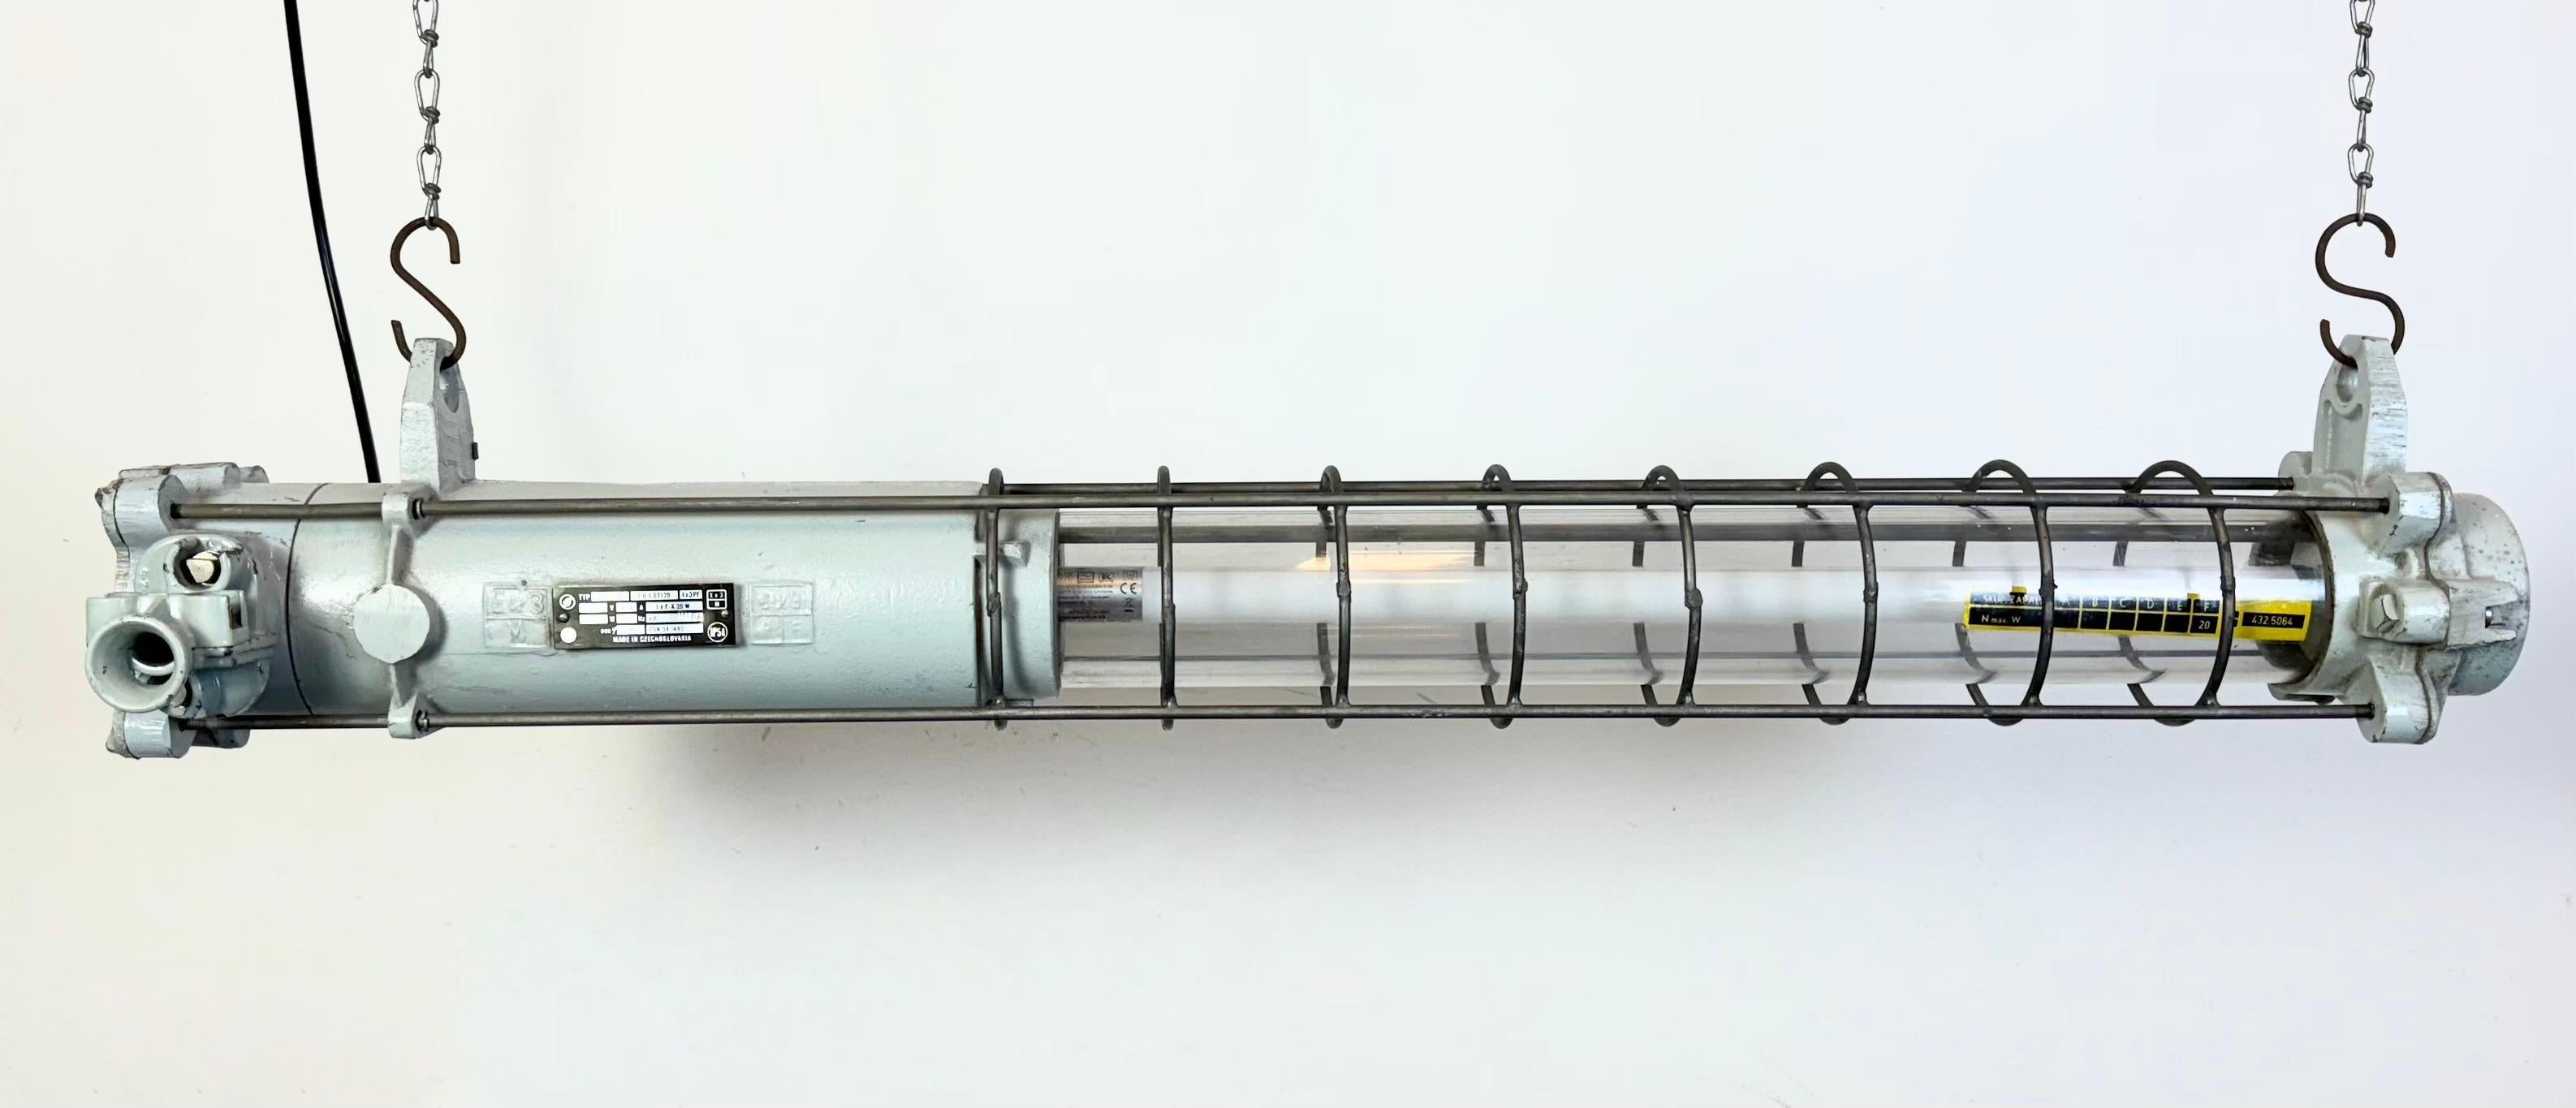 This industrial tube light was made by Elektrosvit in former Czechoslovakia during the 1980s. It is made of an aluminium, plastic glass and iron .The light is converted into one Led T8  light tube. The diameter of the light is 12 cm. The weight of